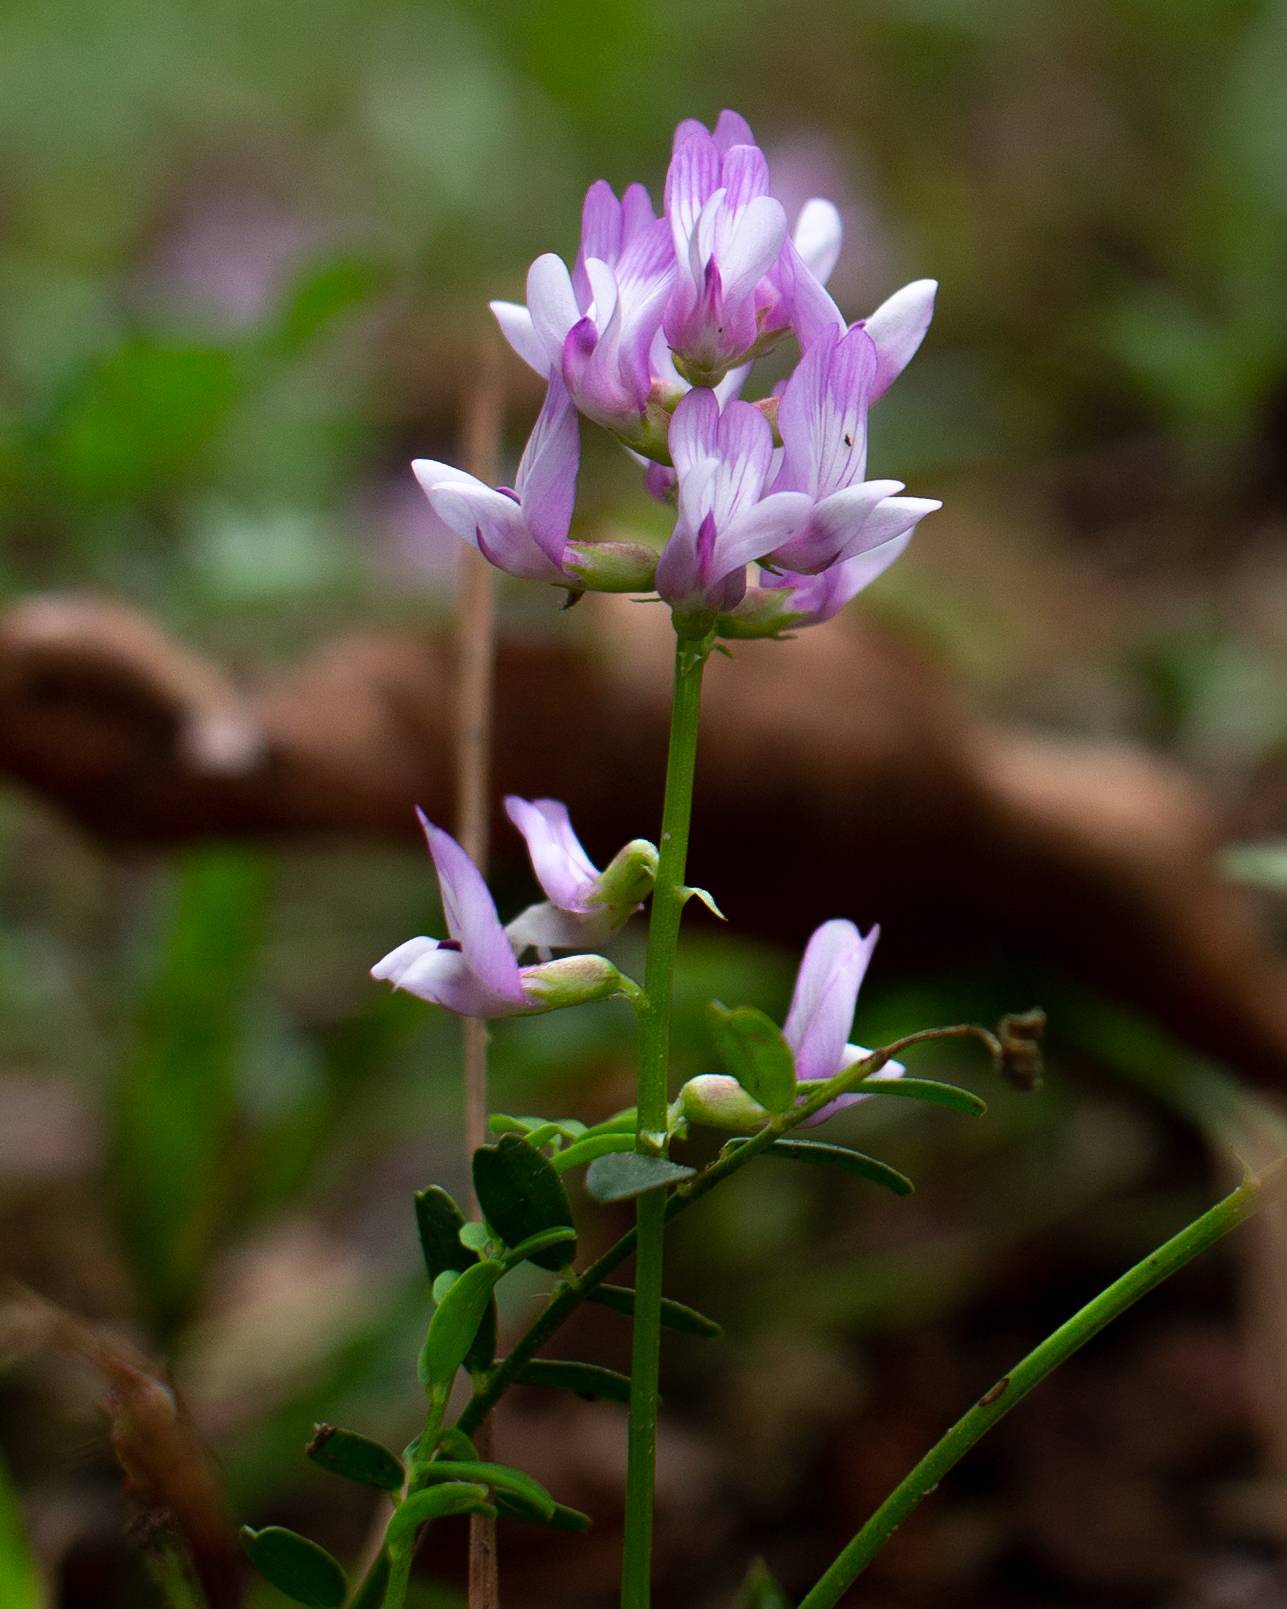 purple-white flowers with green leaves and stems